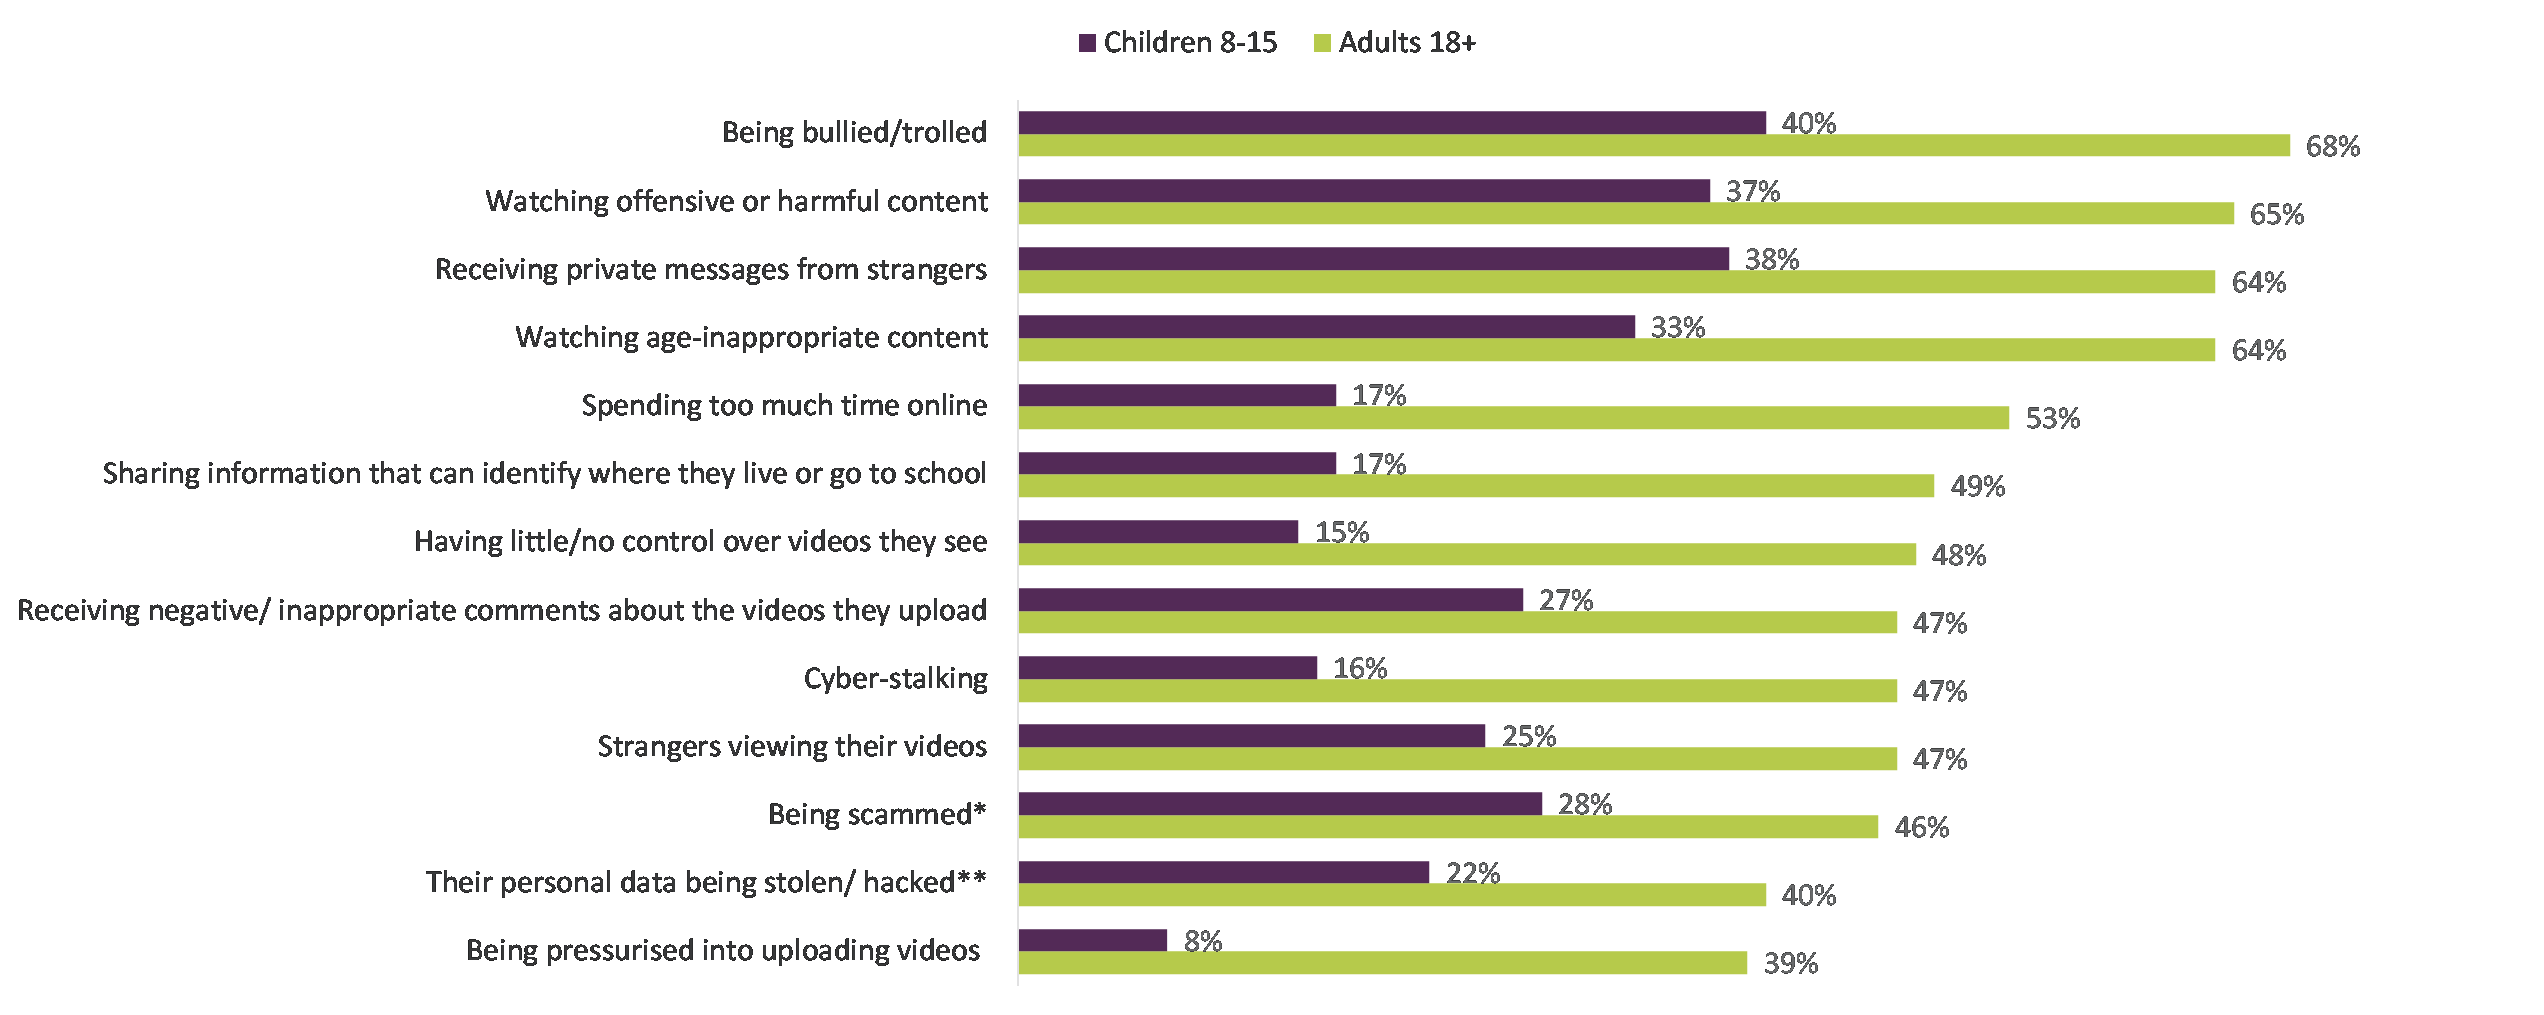 Children and adults were both most concerned about children being bullied or trolled on VSPs. They were both least concerned about being pressurised into uploading videos. 